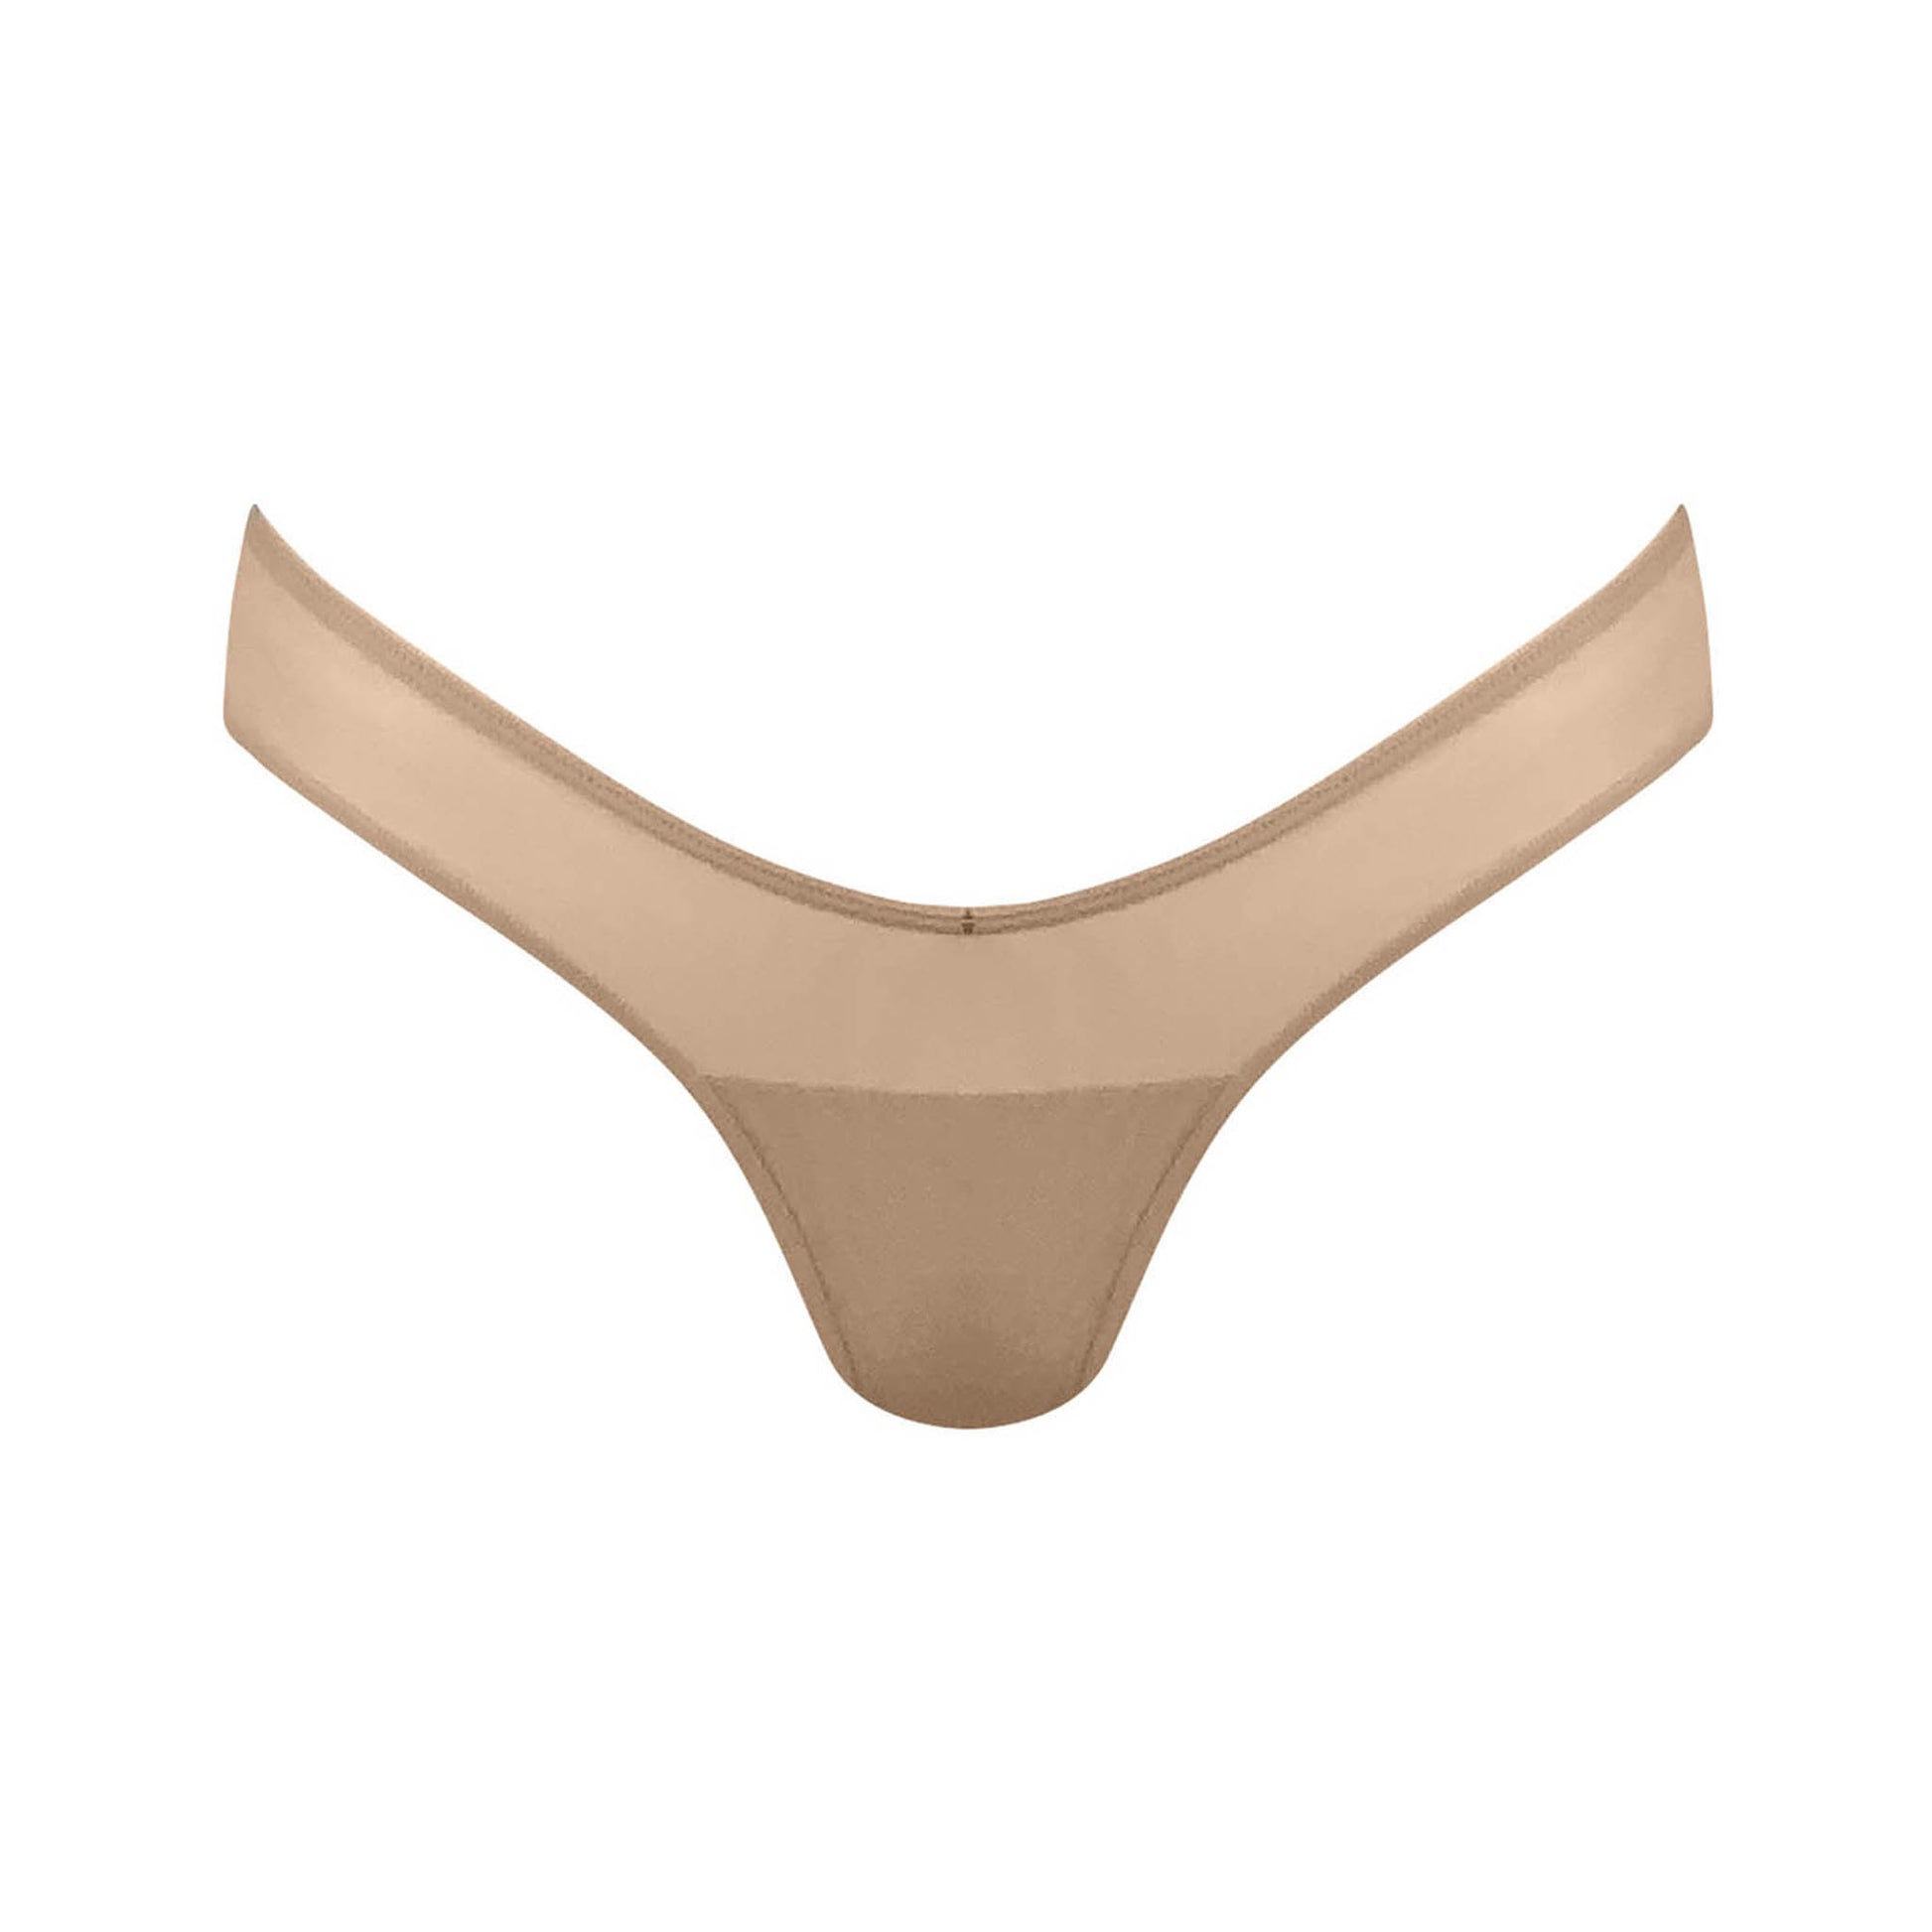 Dip Women's Invisible Line Thong Underwear, L - Fred Meyer